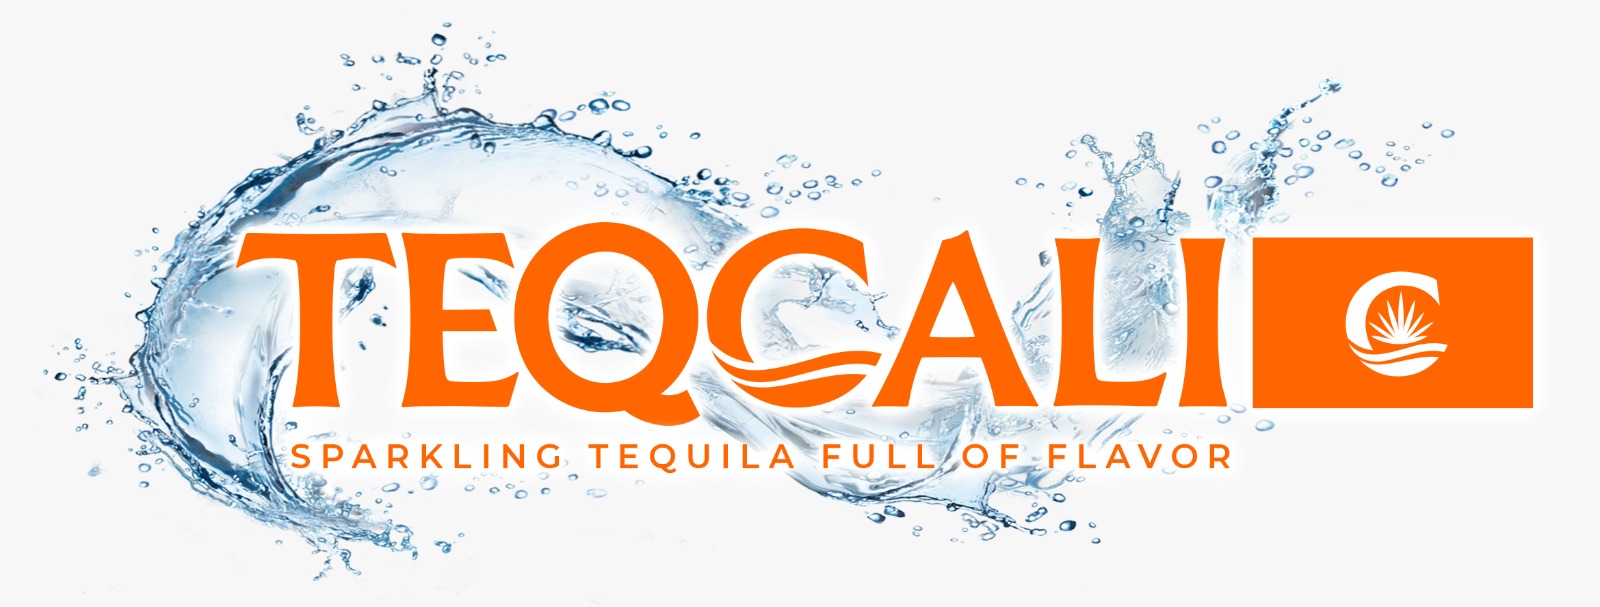 TeqCali Hard Sparkling Water